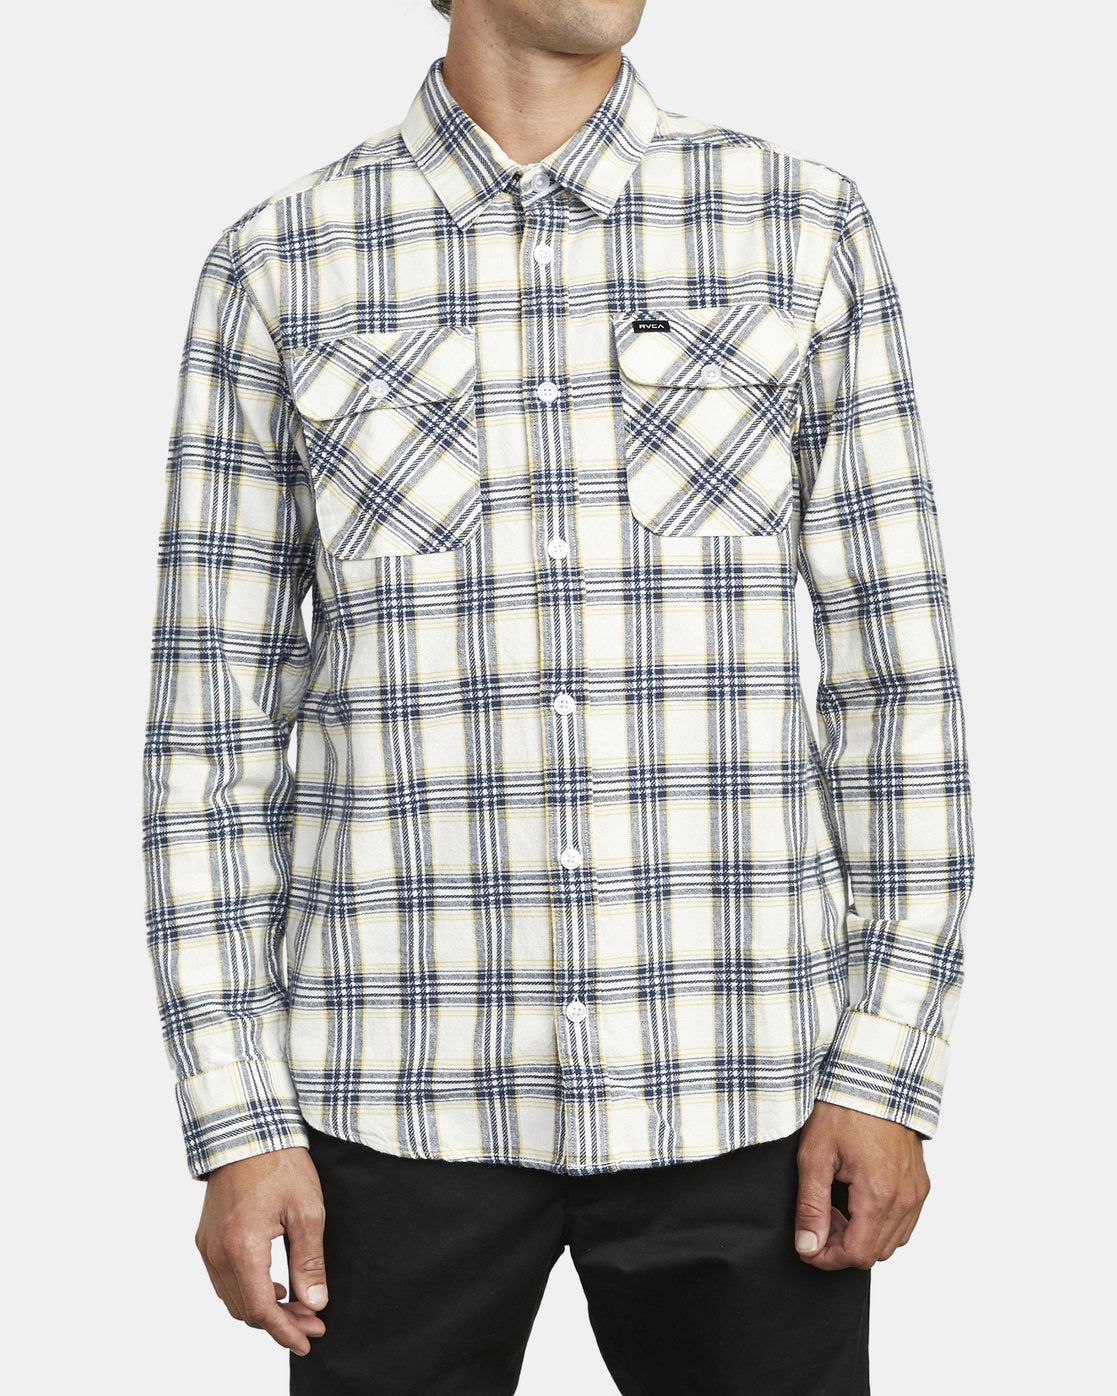 That'll Work Flannel Long Sleeve